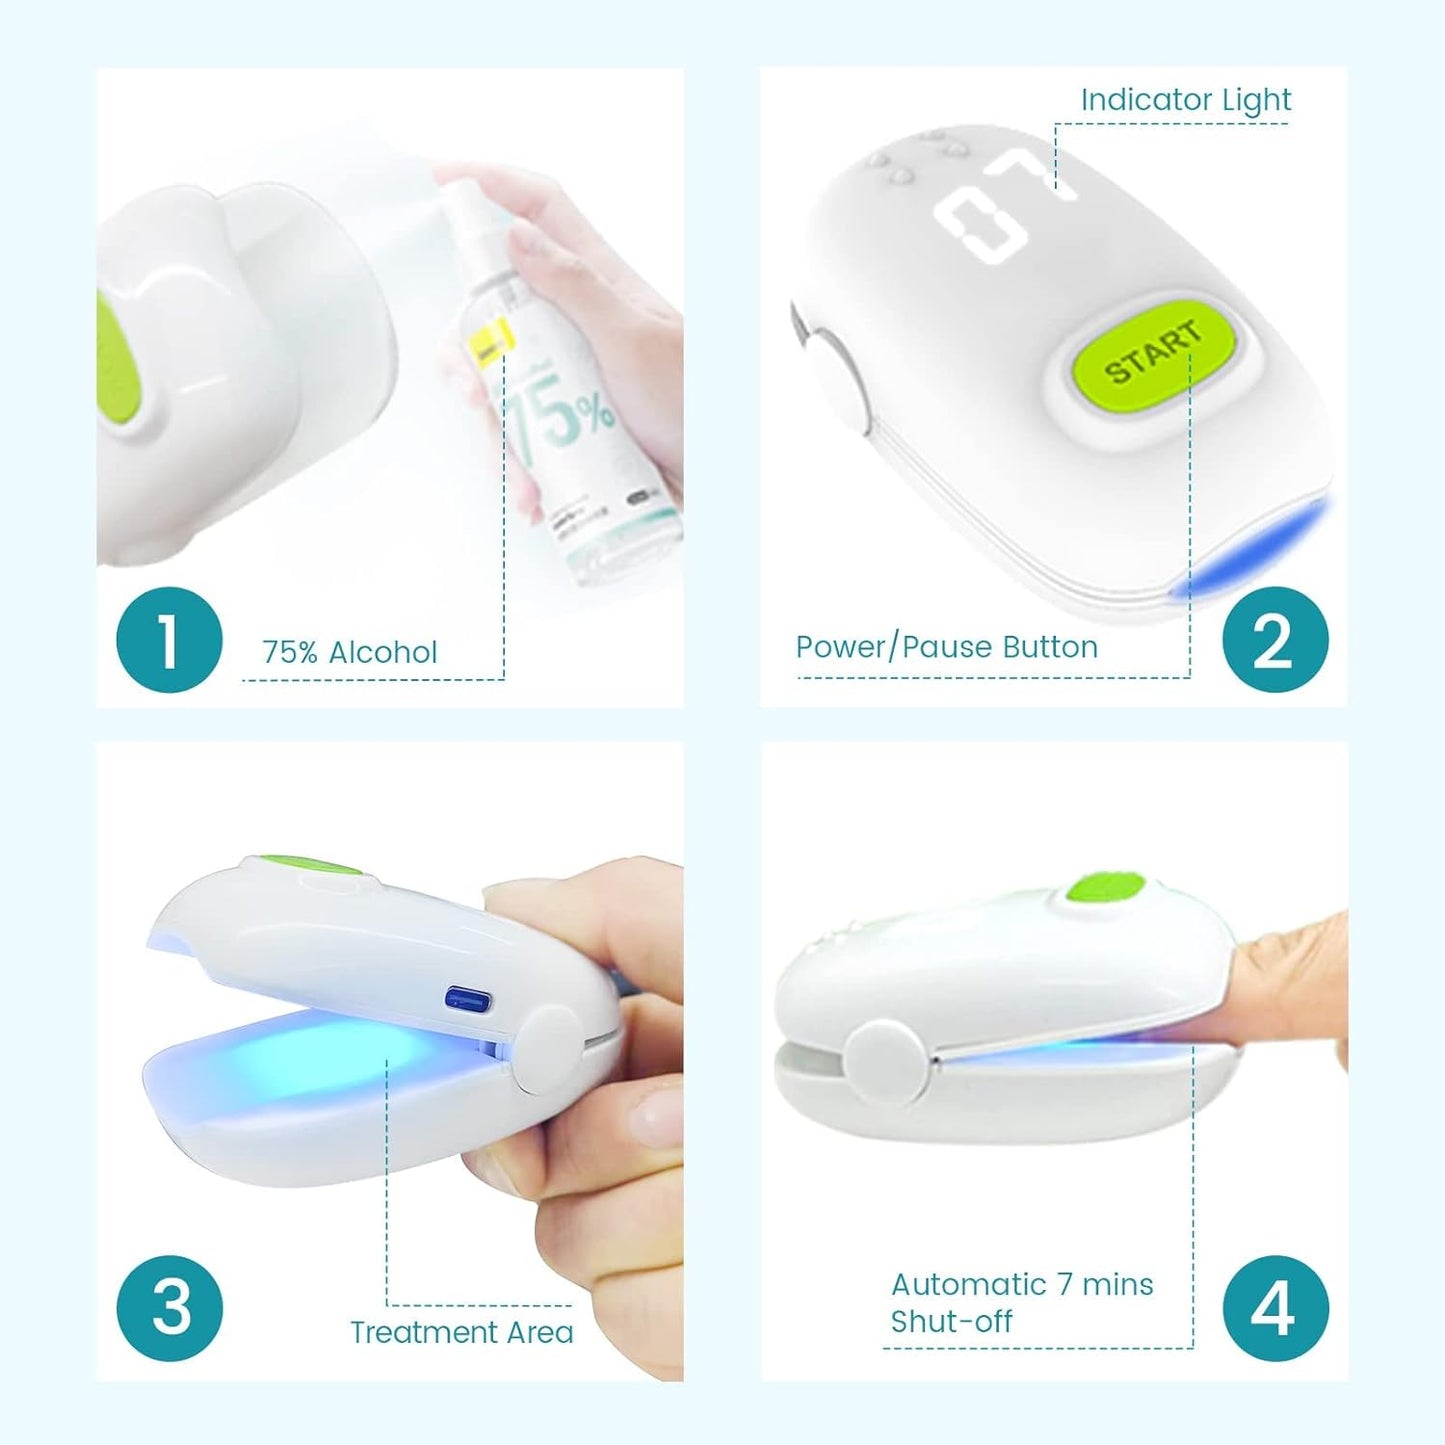 BETISBE Nail Fungus Cleaning LaserDevice for Onychomycosis, Revolutionary Home Use Nail-fungus Remover, Upgraded Highly Effective Treatment Device, Improving the Health of Unsightly Nails for Fingernails